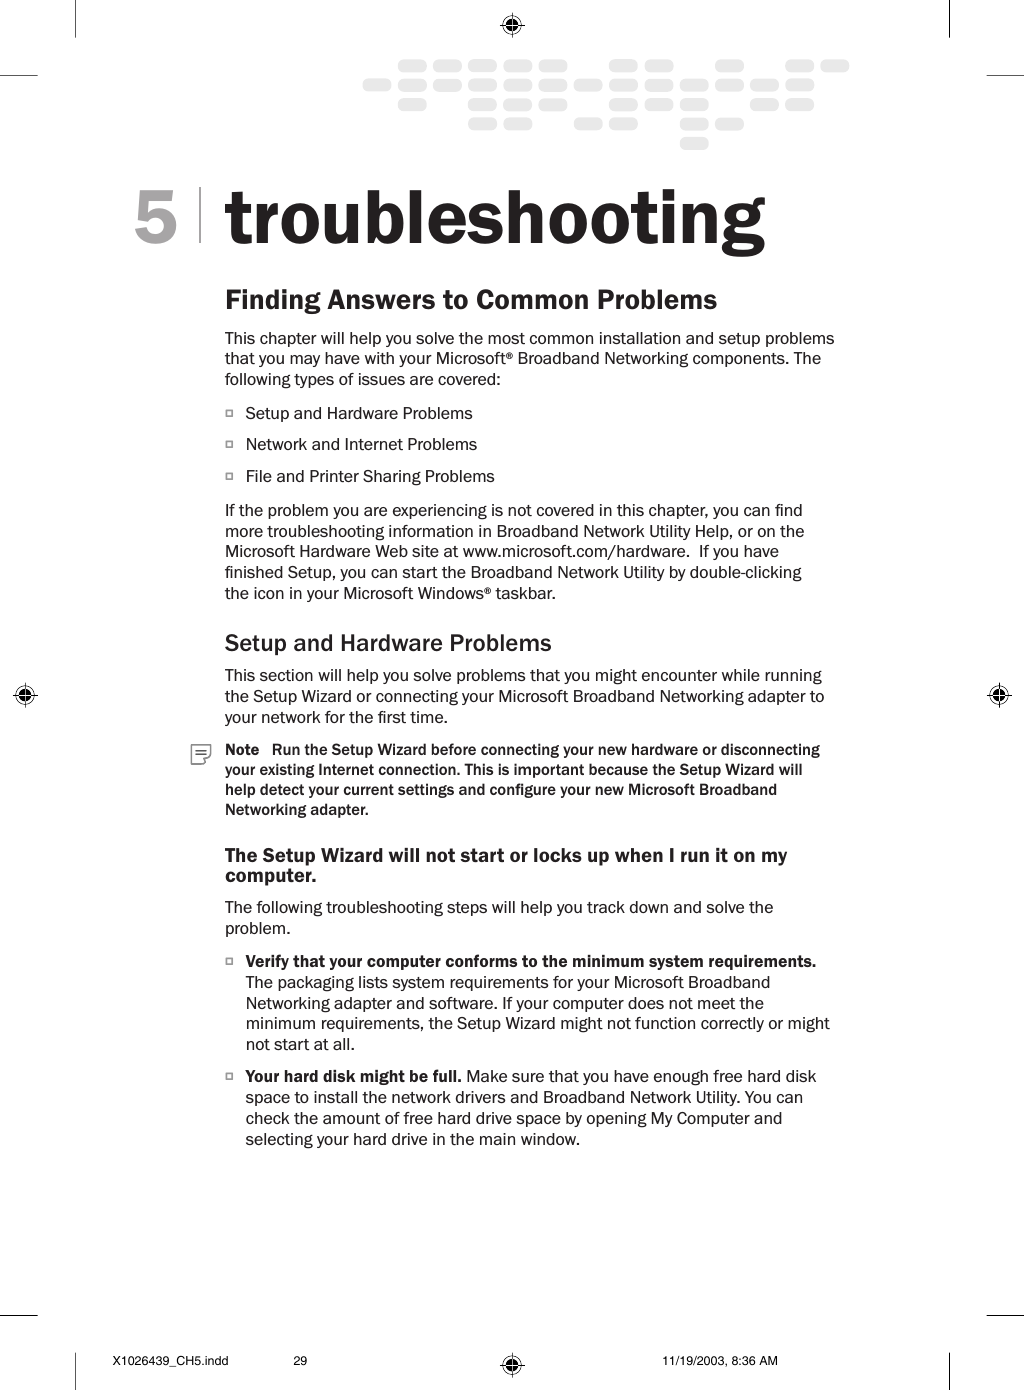 troubleshootingFinding Answers to Common ProblemsThis chapter will help you solve the most common installation and setup problems that you may have with your Microsoft® Broadband Networking components. The following types of issues are covered:O  Setup and Hardware ProblemsO  Network and Internet ProblemsO  File and Printer Sharing ProblemsIf the problem you are experiencing is not covered in this chapter, you can nd more troubleshooting information in Broadband Network Utility Help, or on the Microsoft Hardware Web site at www.microsoft.com/hardware.  If you have nished Setup, you can start the Broadband Network Utility by double-clicking the icon in your Microsoft Windows® taskbar.Setup and Hardware ProblemsThis section will help you solve problems that you might encounter while running the Setup Wizard or connecting your Microsoft Broadband Networking adapter to your network for the rst time. Note   Run the Setup Wizard before connecting your new hardware or disconnecting your existing Internet connection. This is important because the Setup Wizard will help detect your current settings and congure your new Microsoft Broadband Networking adapter.The Setup Wizard will not start or locks up when I run it on my computer.The following troubleshooting steps will help you track down and solve the problem.O  Verify that your computer conforms to the minimum system requirements. The packaging lists system requirements for your Microsoft Broadband Networking adapter and software. If your computer does not meet the minimum requirements, the Setup Wizard might not function correctly or might not start at all. O  Your hard disk might be full. Make sure that you have enough free hard disk space to install the network drivers and Broadband Network Utility. You can check the amount of free hard drive space by opening My Computer and selecting your hard drive in the main window.5X1026439_CH5.indd 11/19/2003, 8:36 AM29